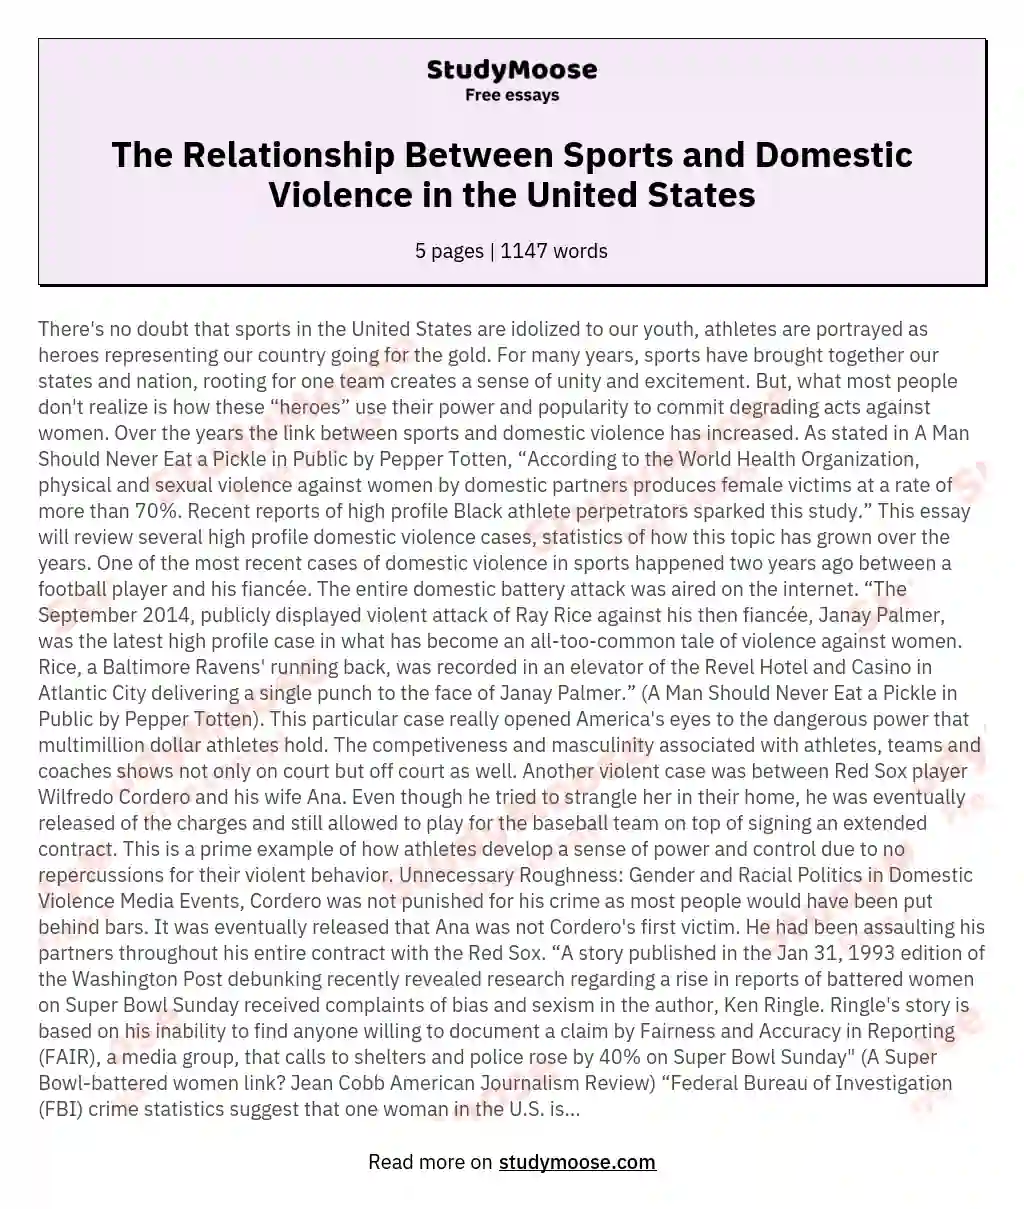 The Relationship Between Sports and Domestic Violence in the United States essay